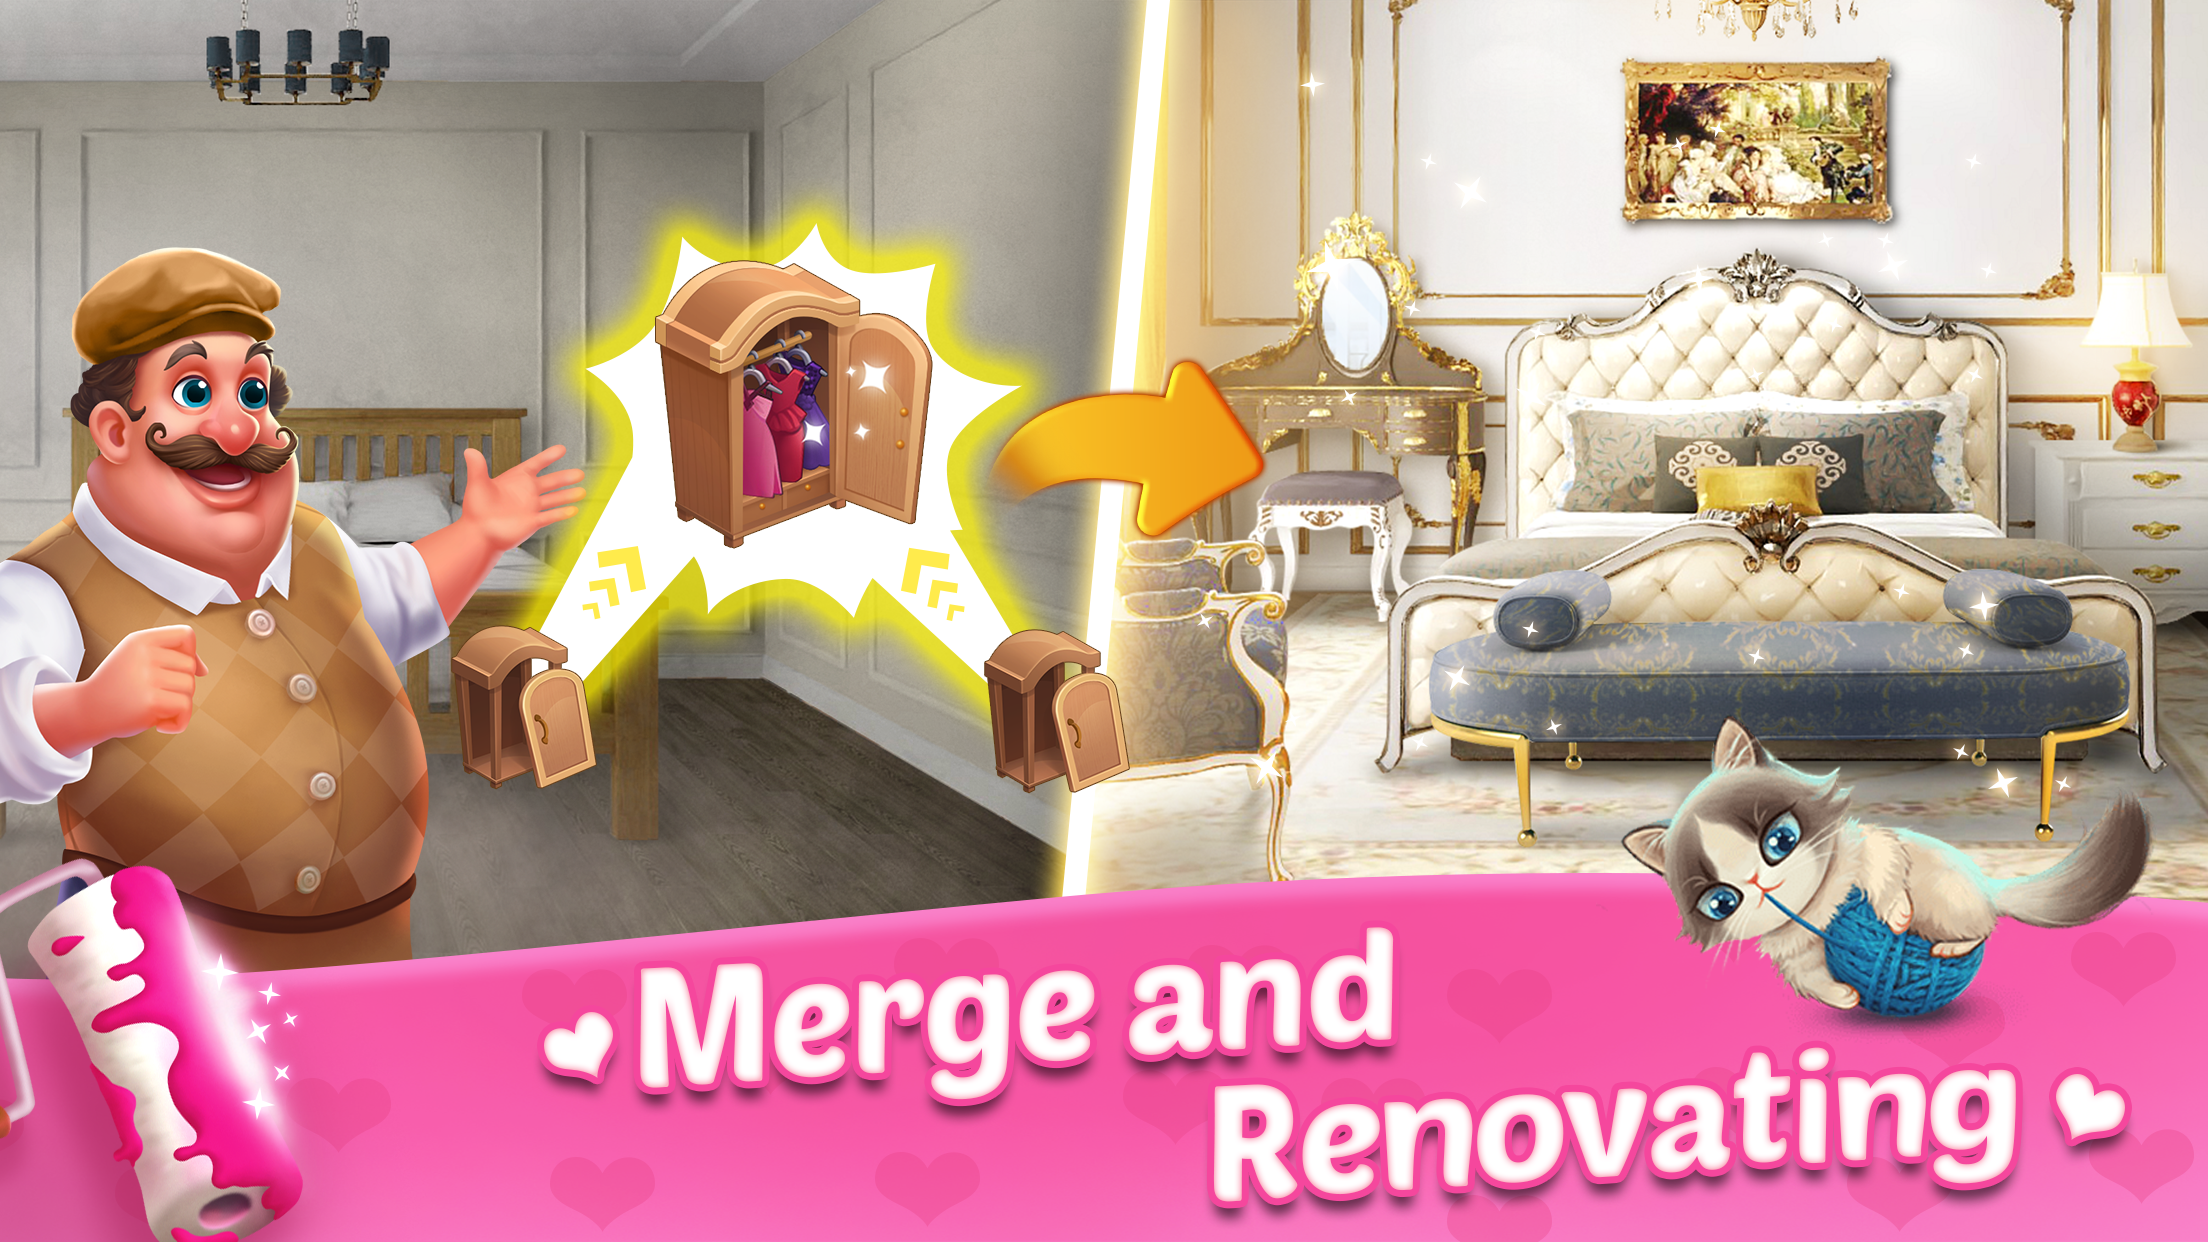 Screenshot 1 of Merge Dream - Mansion design - Decorate your house 1.6.1